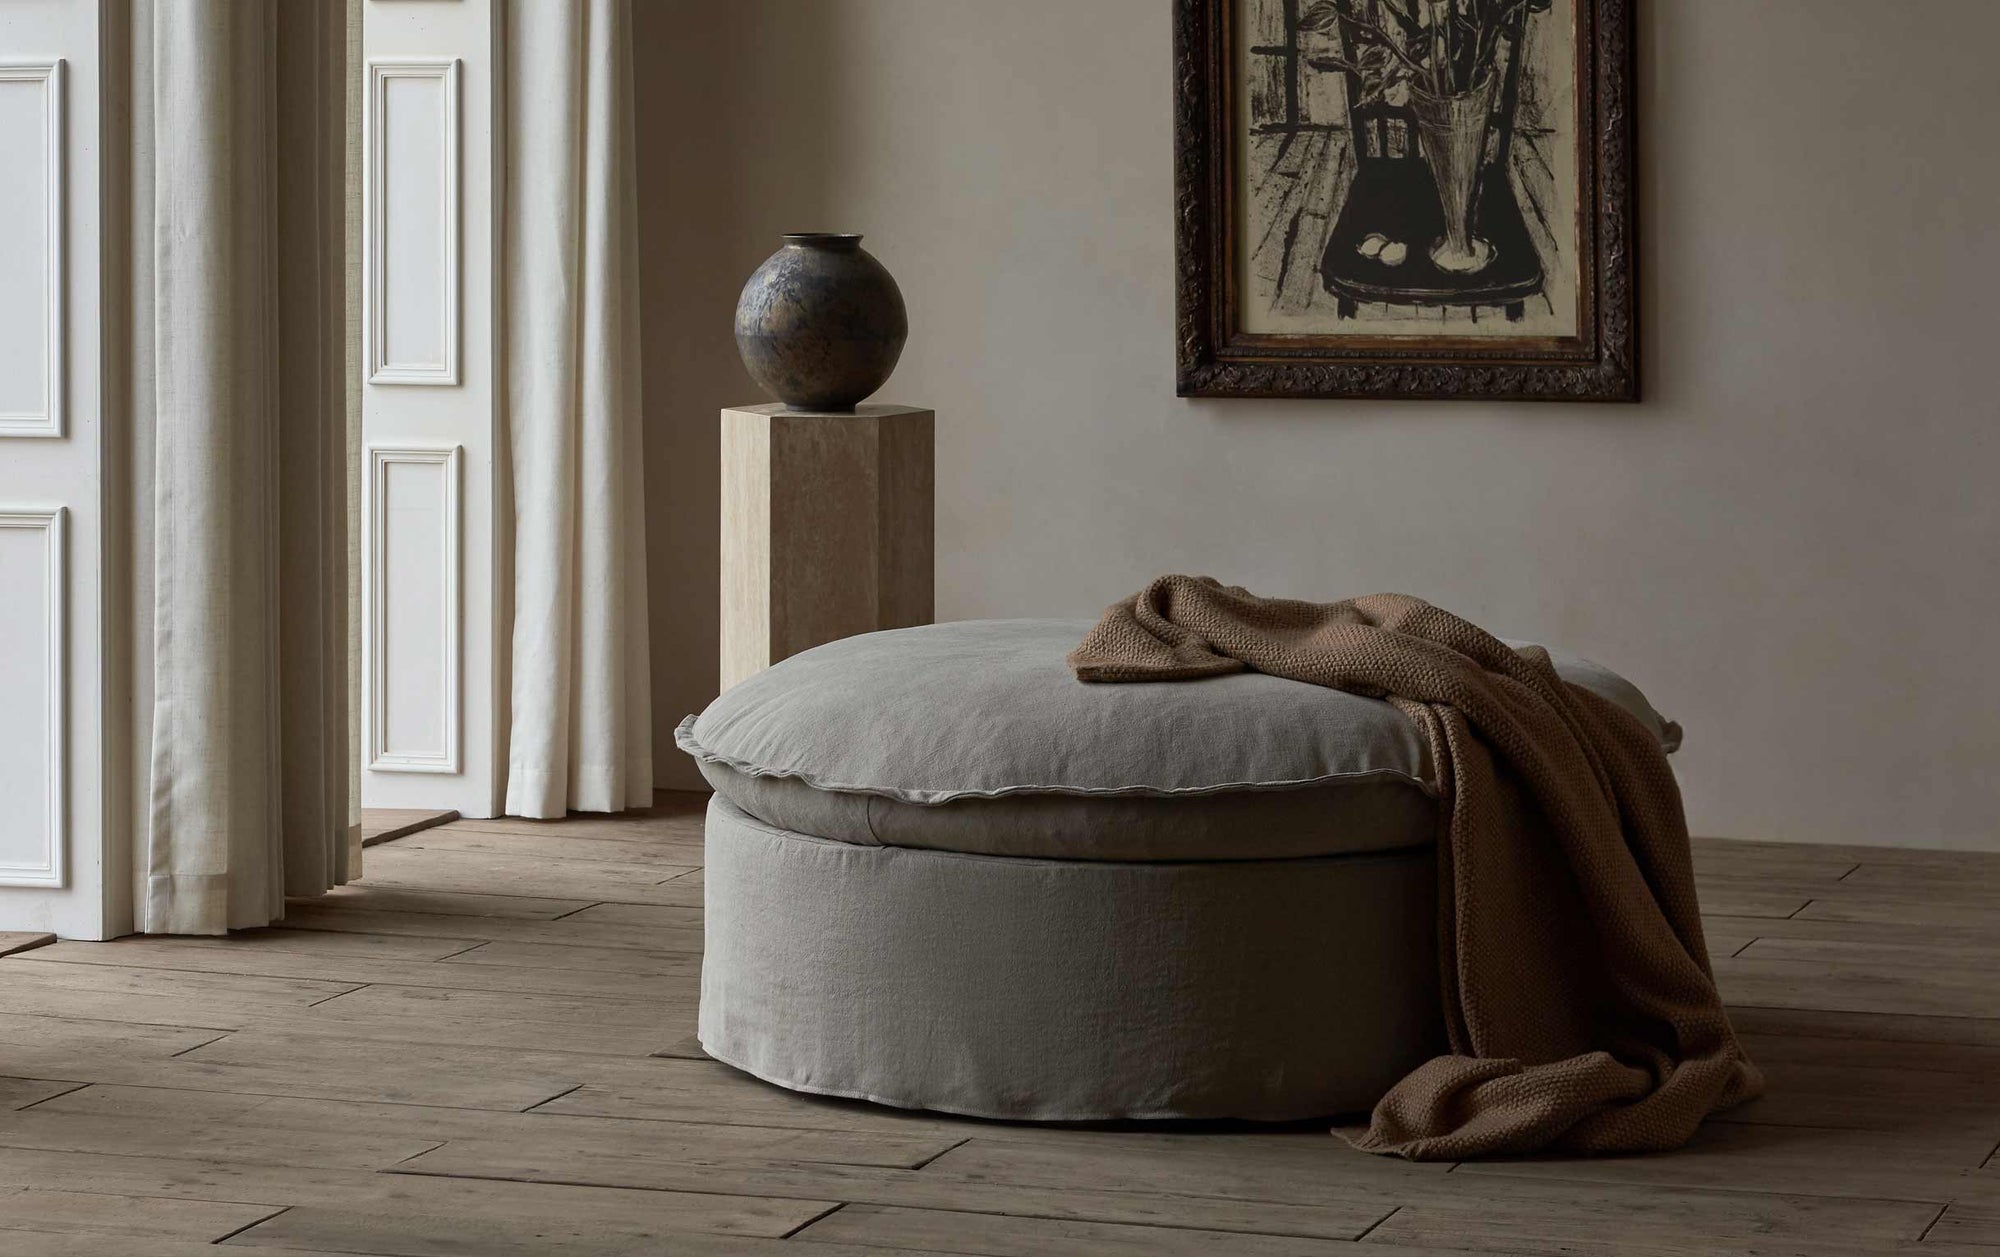 Neva Round Storage Ottoman in Oat Flour, a medium taupe Light Weight Linen, with a brown throw blanket, placed in a room decorated with art and a vase